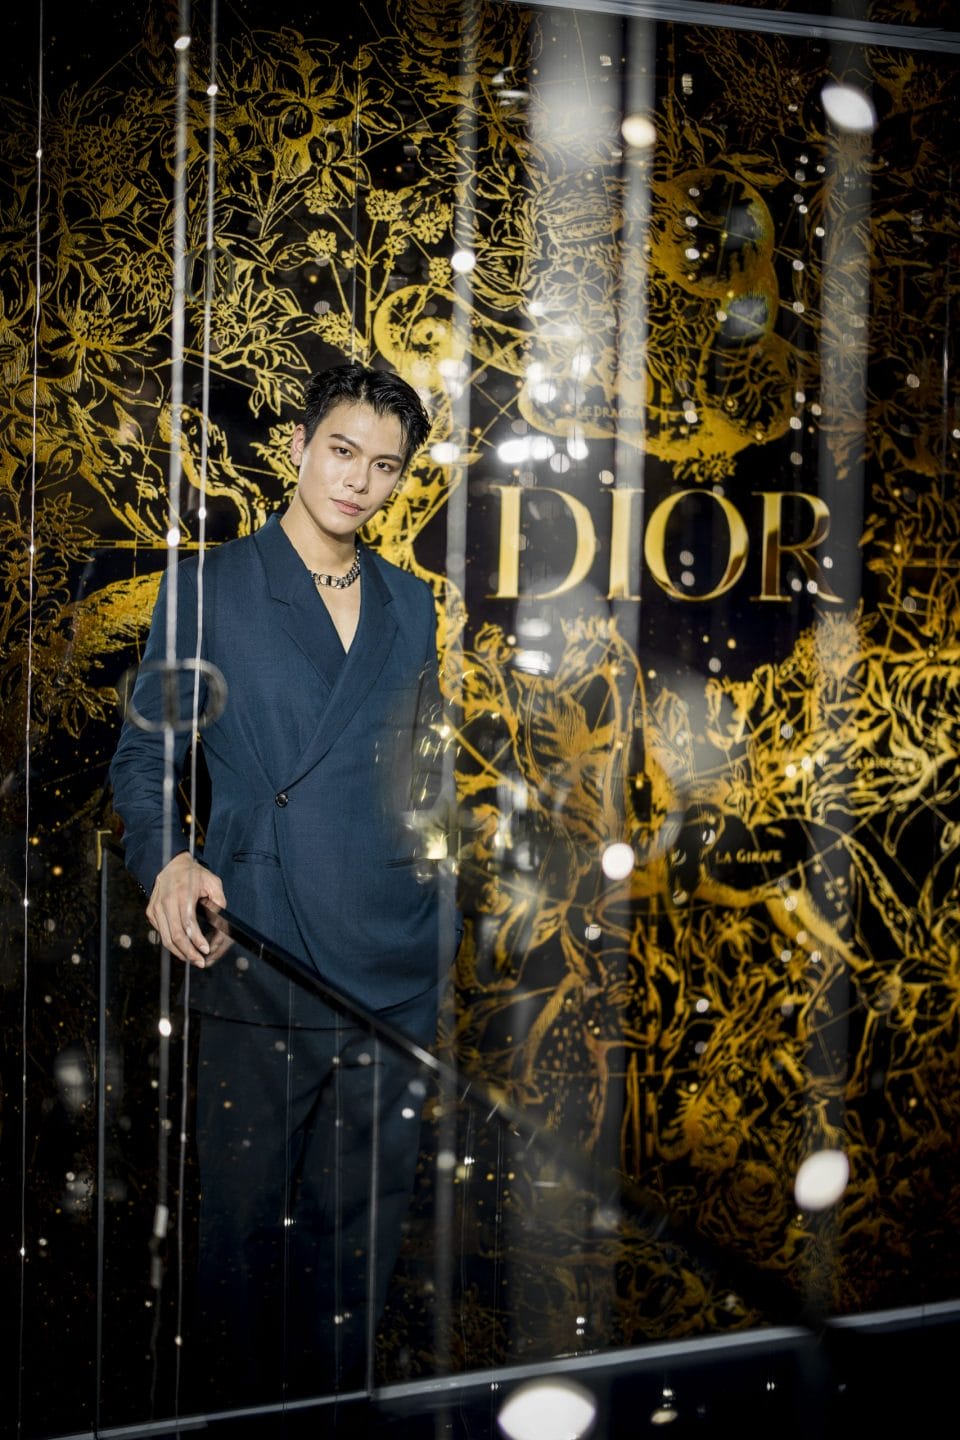 Dior 'The Atelier of Dreams', Brand Activation